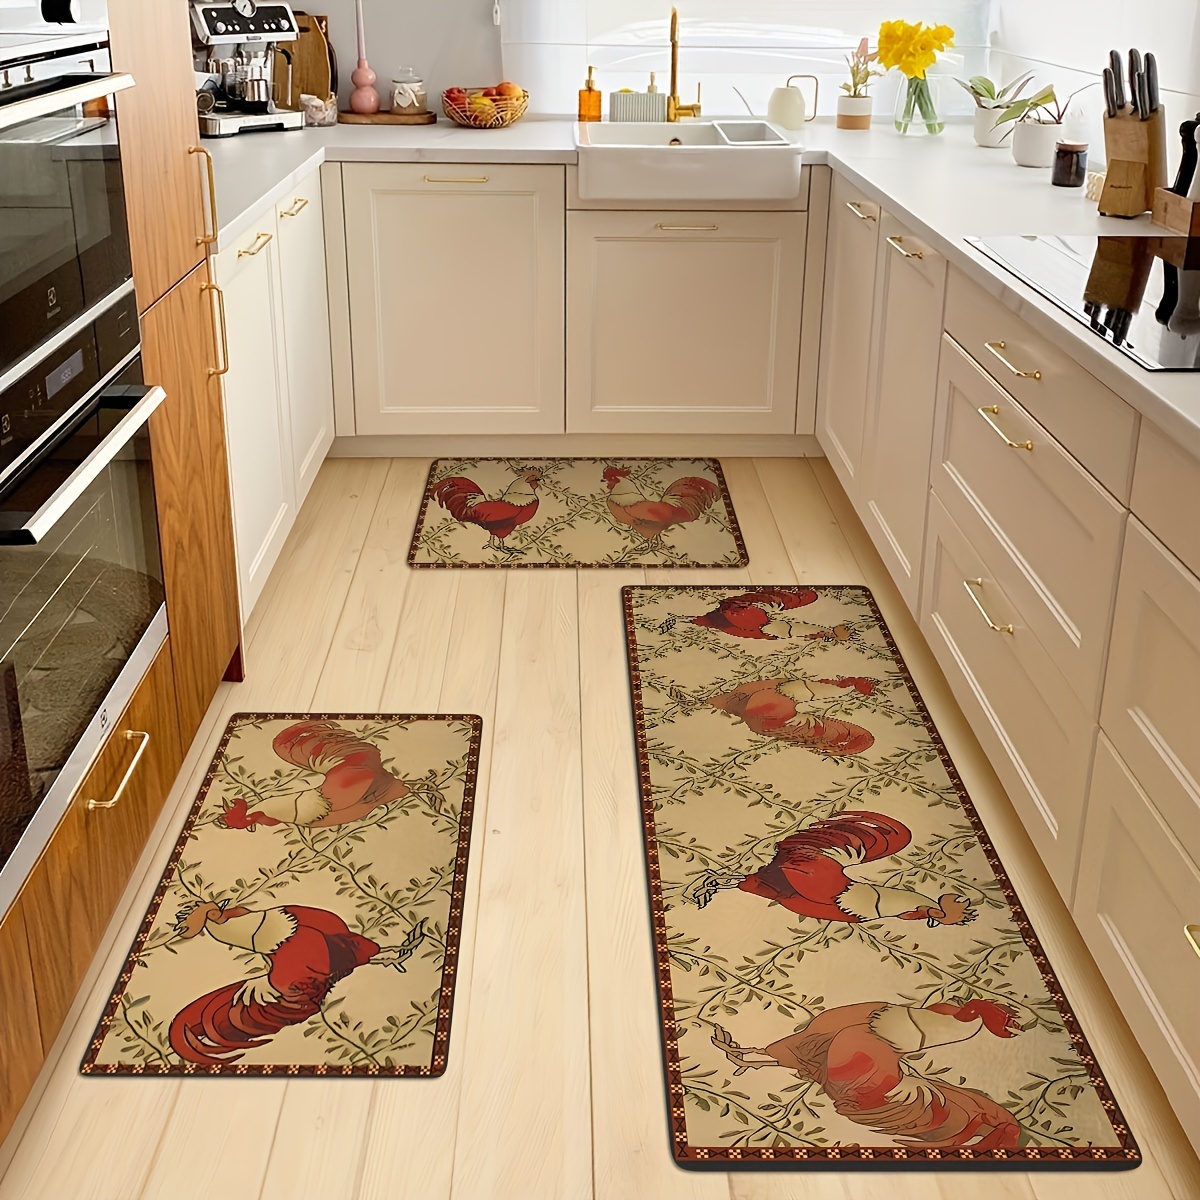 

3pcs/set Rooster Pattern Floor Rug, Non-slip Absorbent Carpet, Three-piece Bathroom Mat Set, Thick Carpets For Kitchen, Home, Office, Sink, Laundry Room, Bathroom, Home Room Decor, Spring Summer Decor